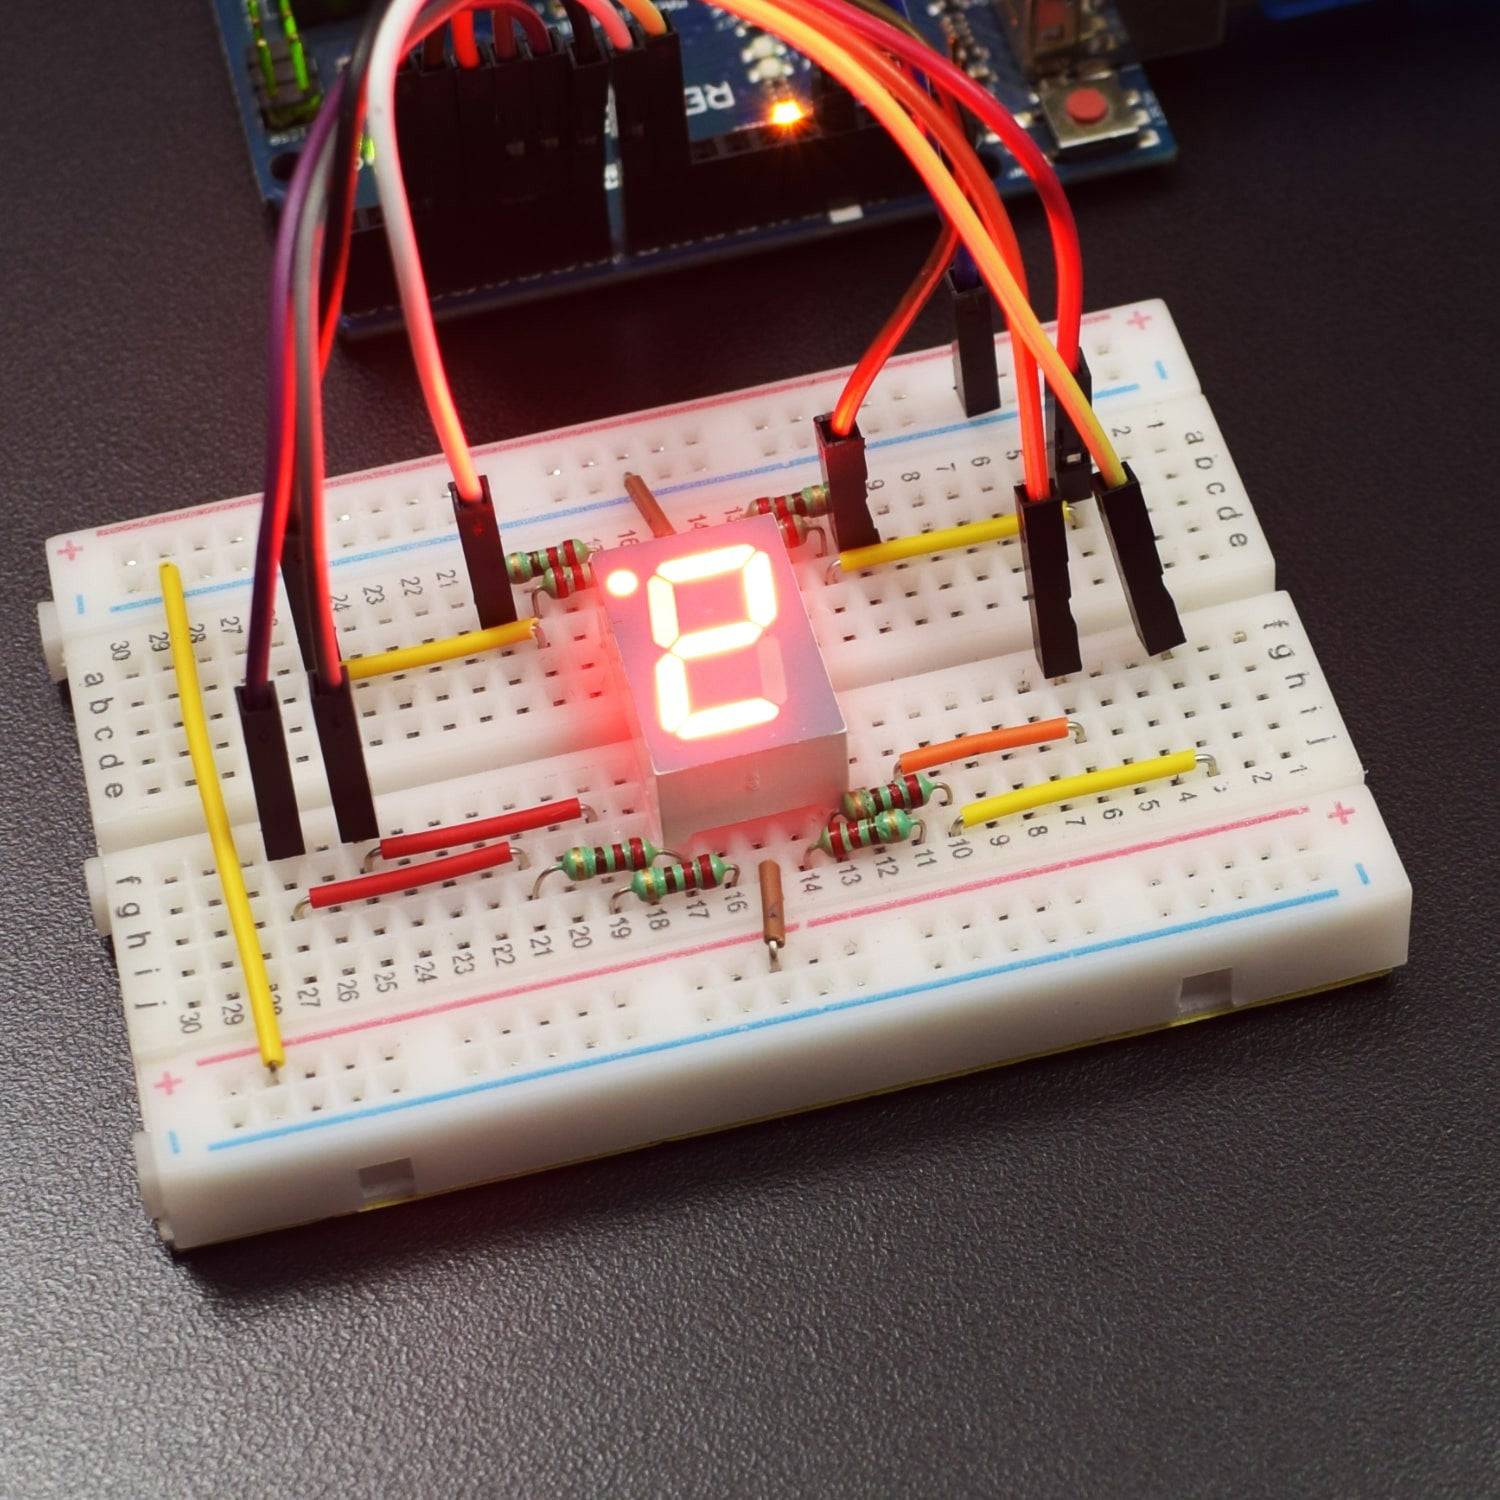 Make a launch pad count down sequence display using 7 segment display interfacing with Arduino uno - KT936 - REES52